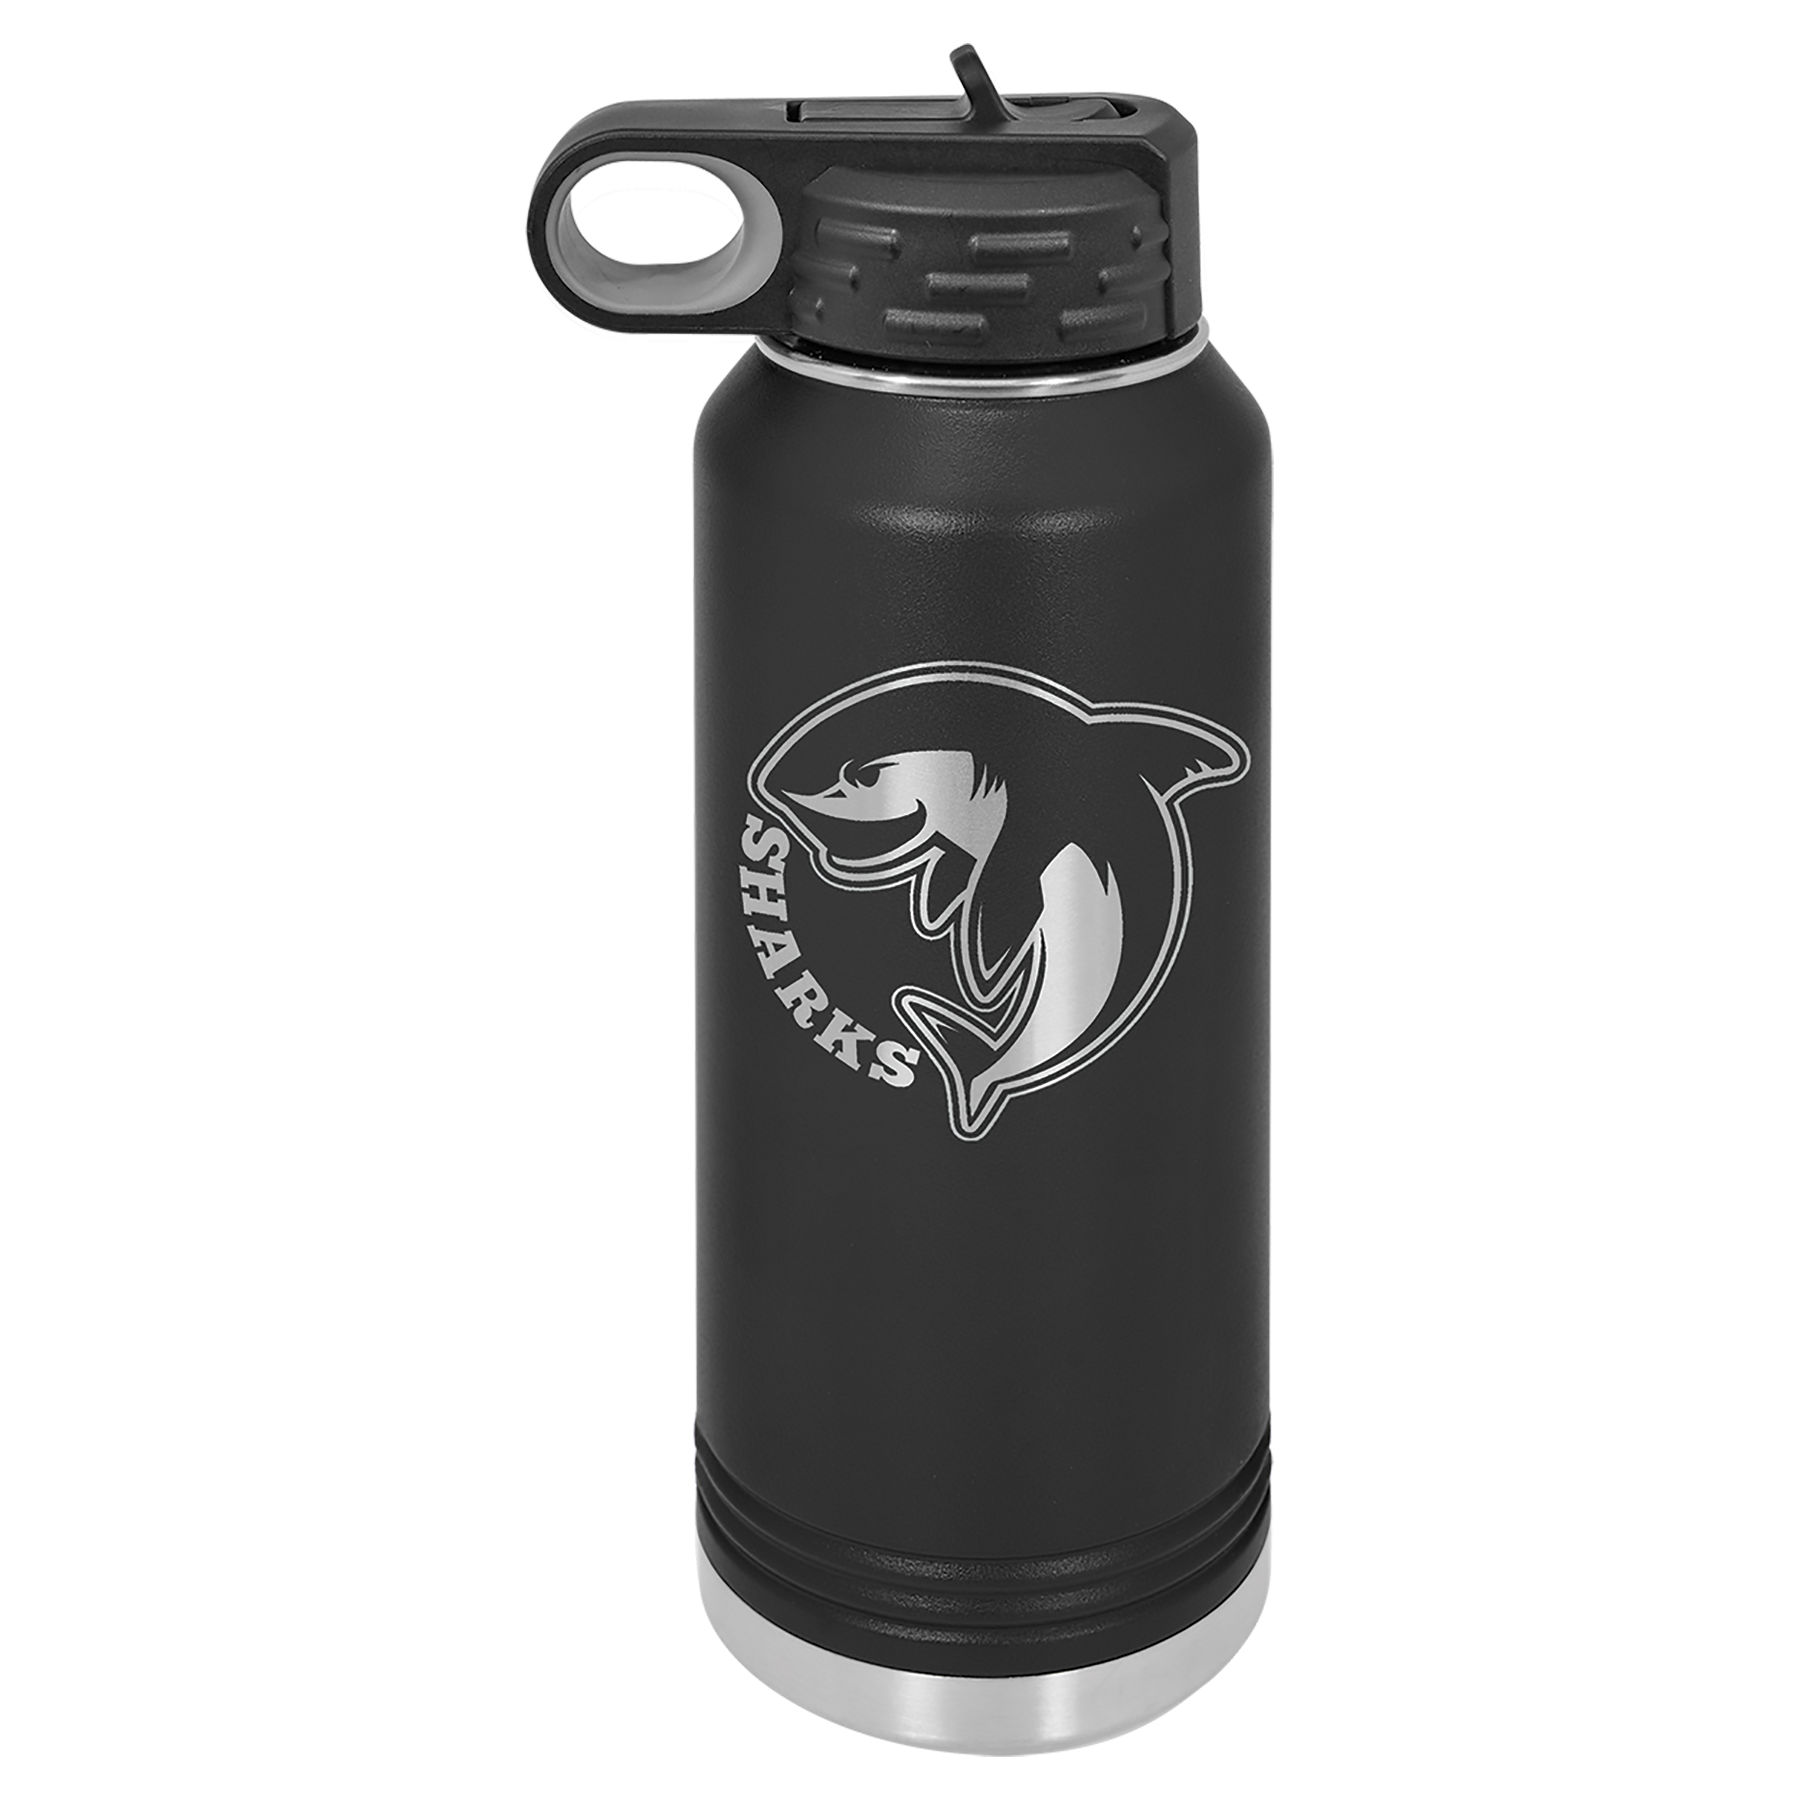 32 oz. Black Stainless Steel Insulated Water Bottler.  Customizable with your personal image or saying.